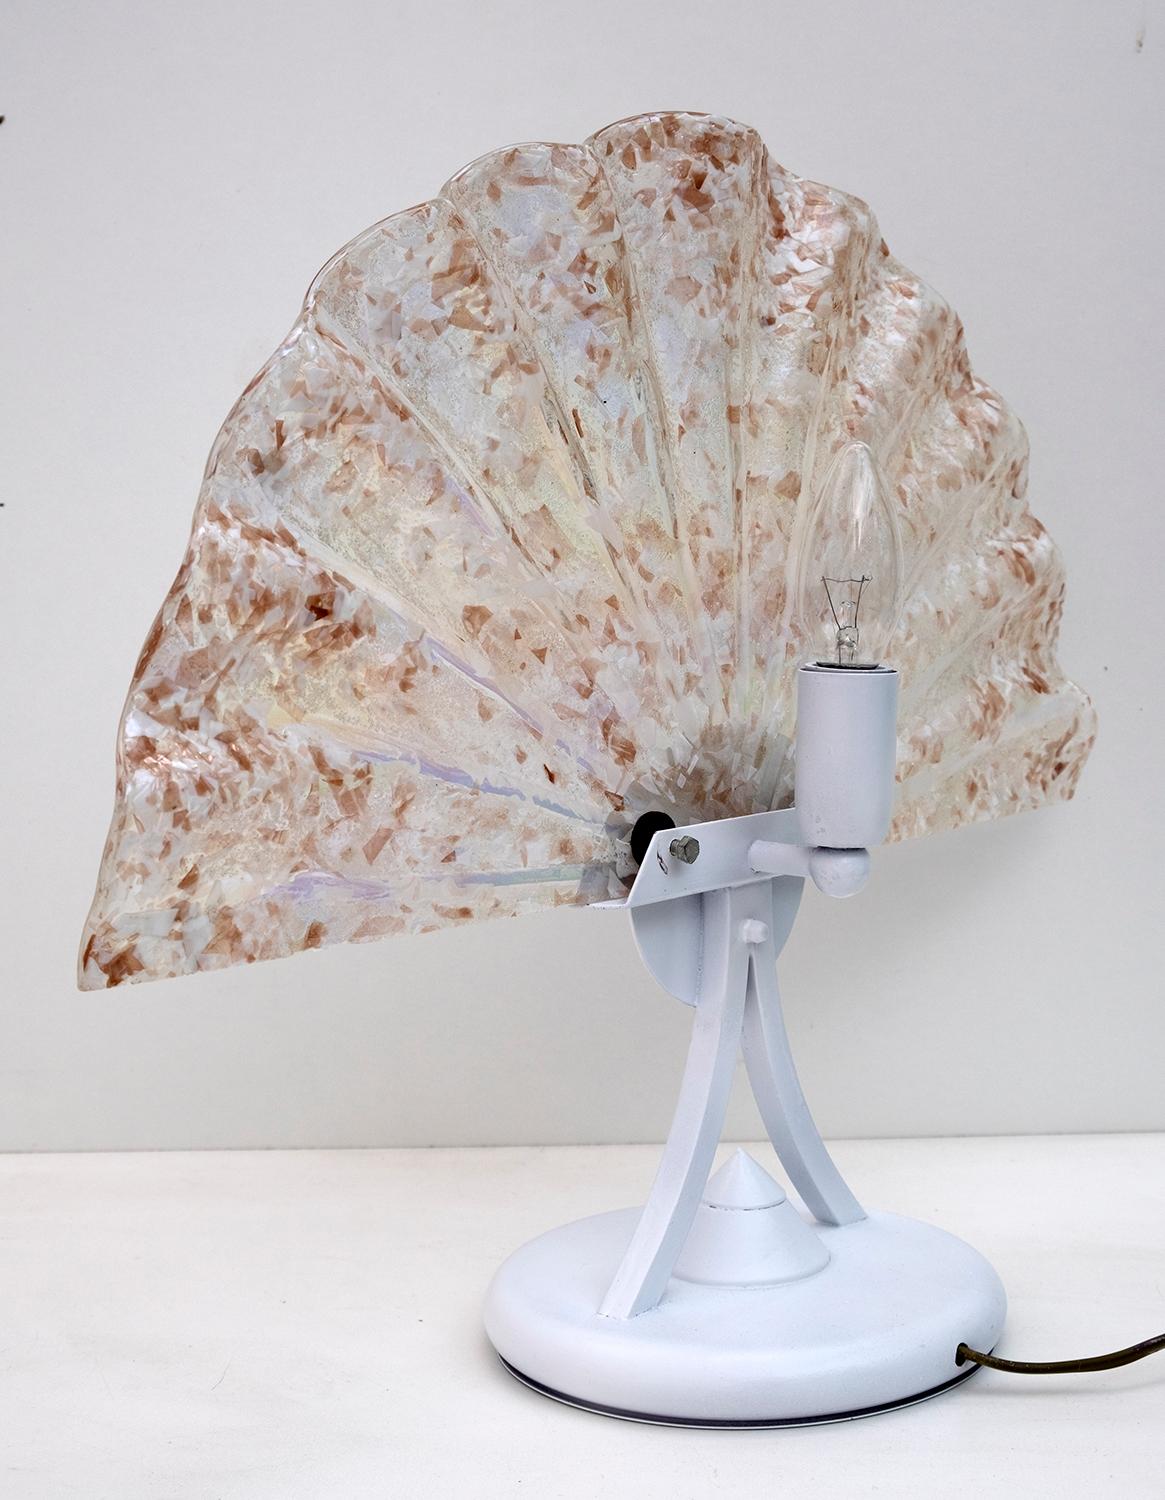 Pair of Postmodern Italian Iridescent Murano Glass Fan Table Lamps, 1980s For Sale 1